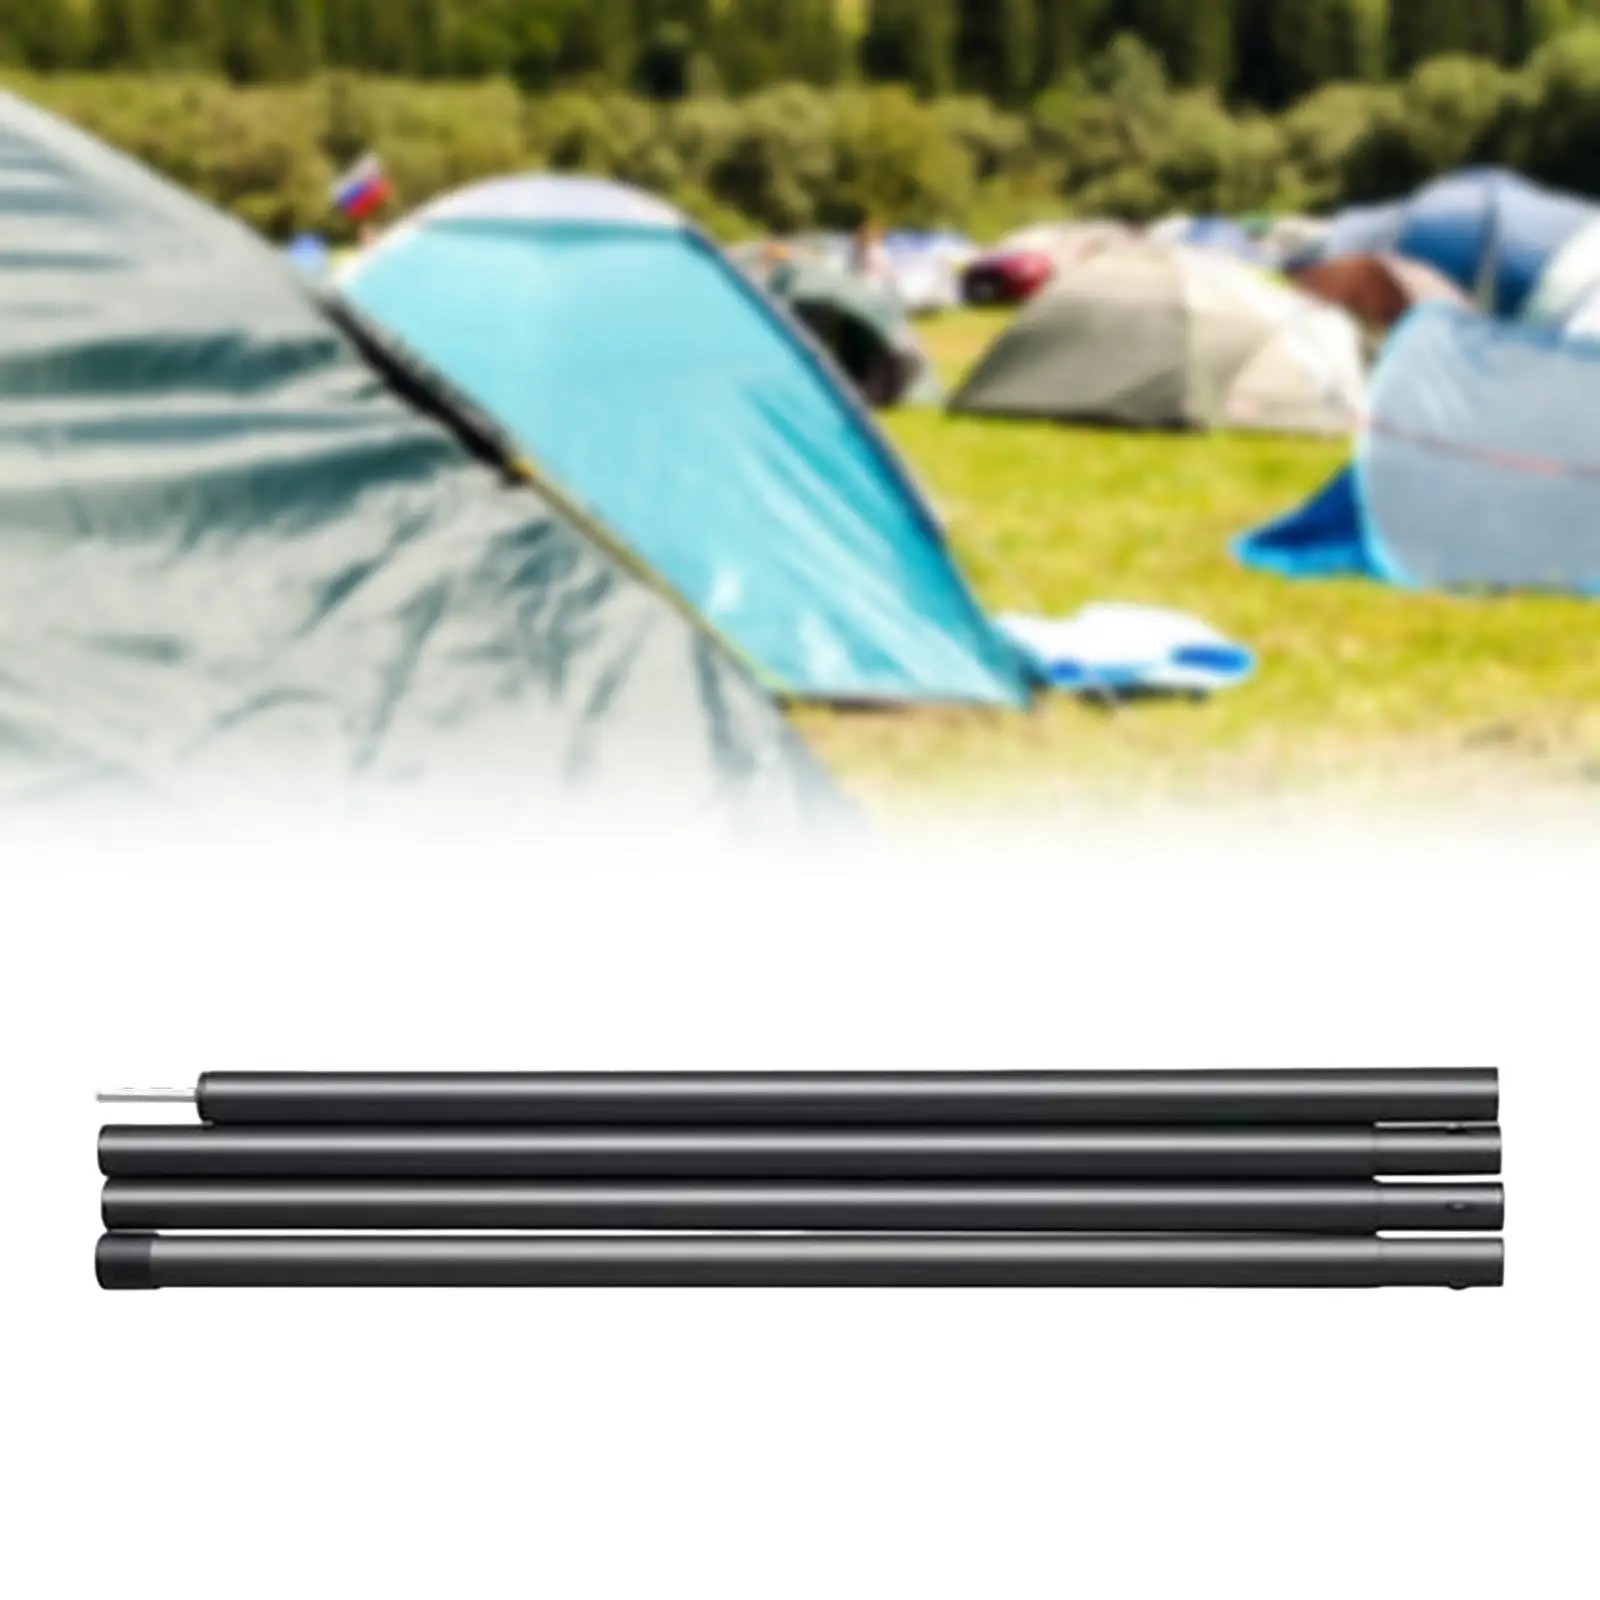 Universal Adjustable Tarp Poles Awning Support Pole Wear Resistant Support Rods Durable for Beach Home Backyard Traveling Picnic